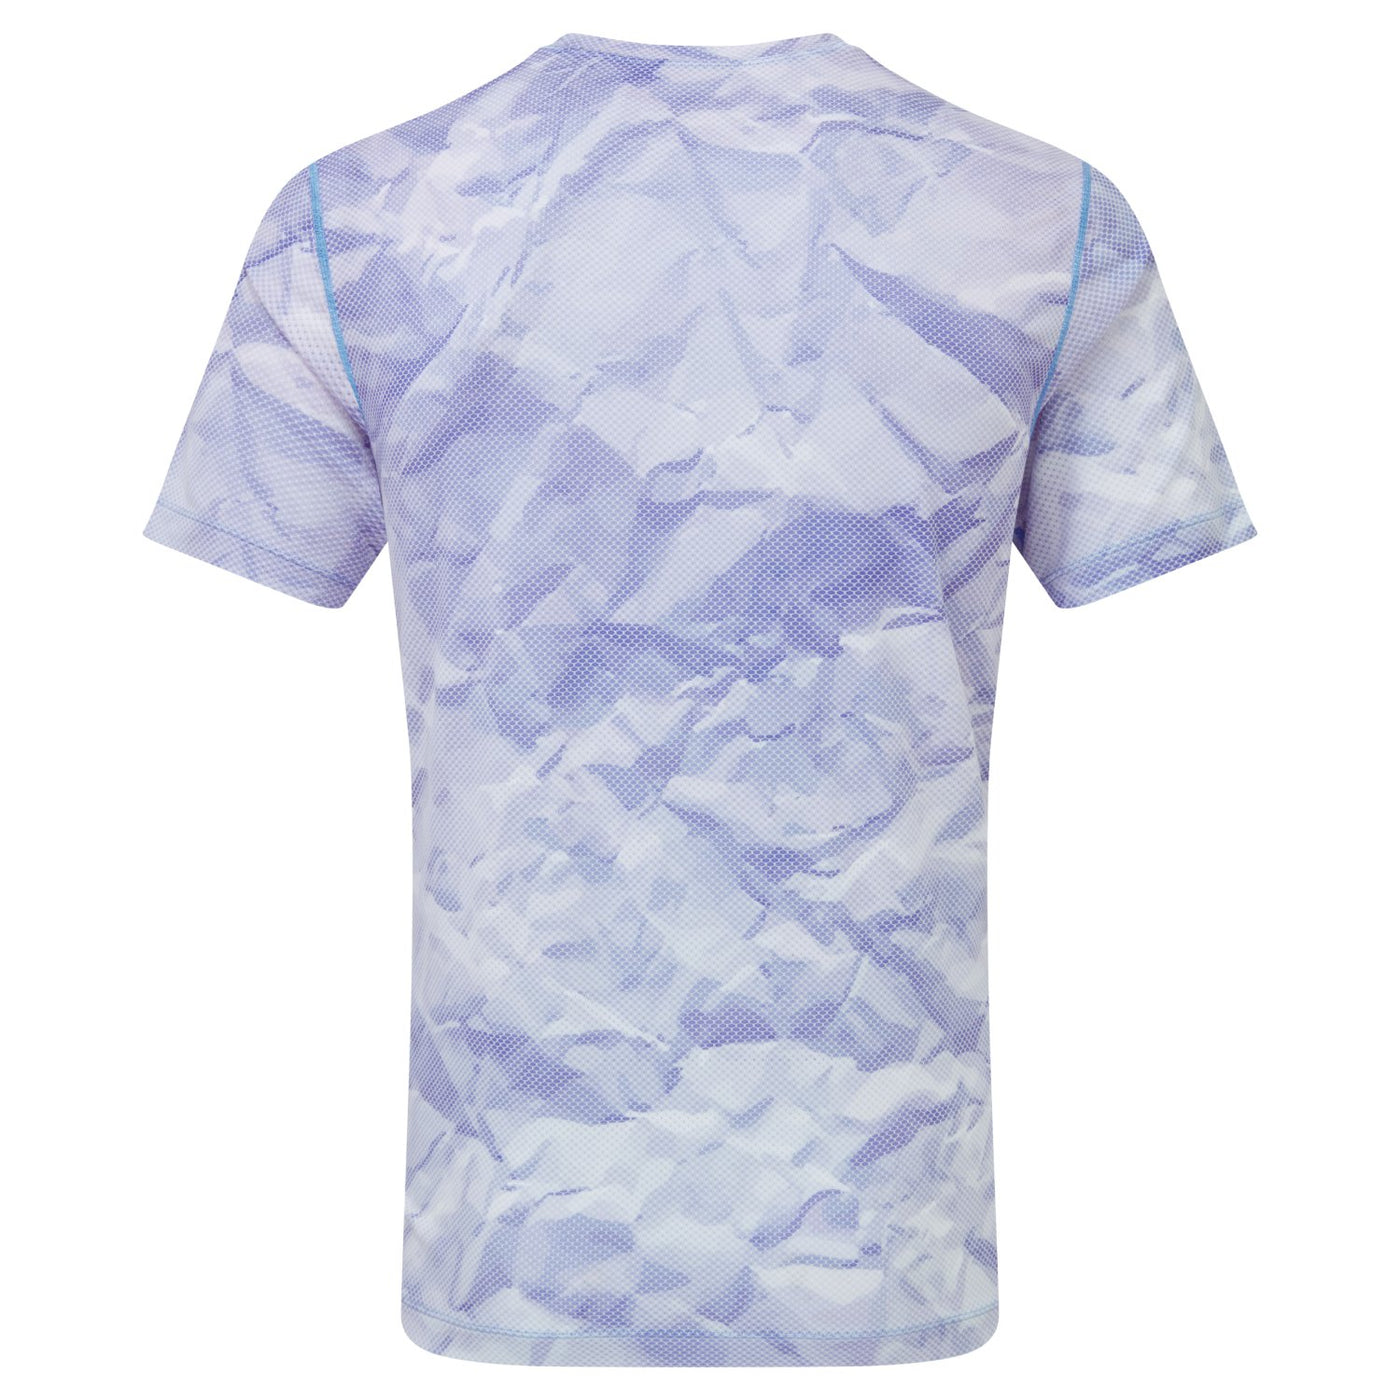 RonHill Mens Tech Golden Hour Tee - Lake Blue Crinkle